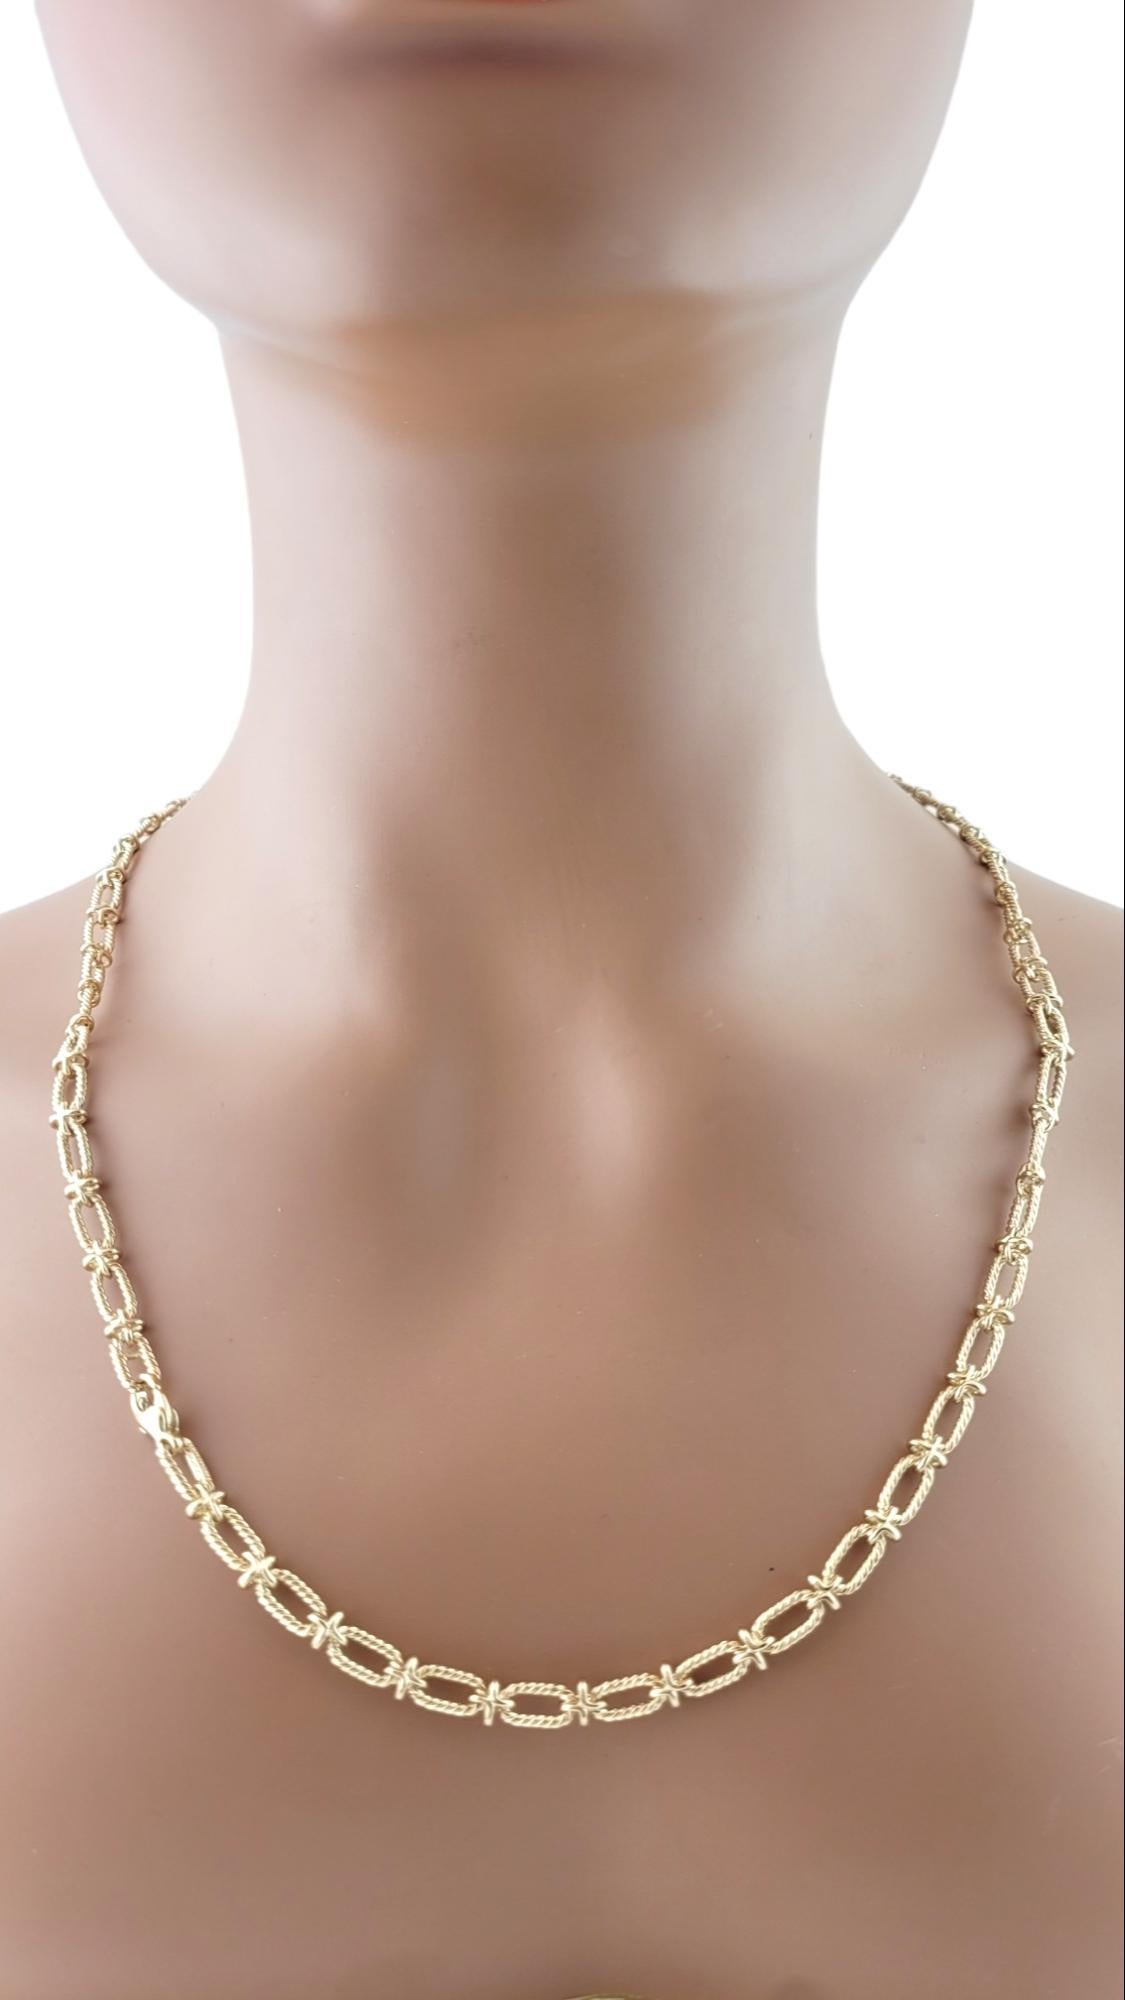 Tiffany & Co. 14K Yellow Gold Oval Link Ribbed Chain #15830 1